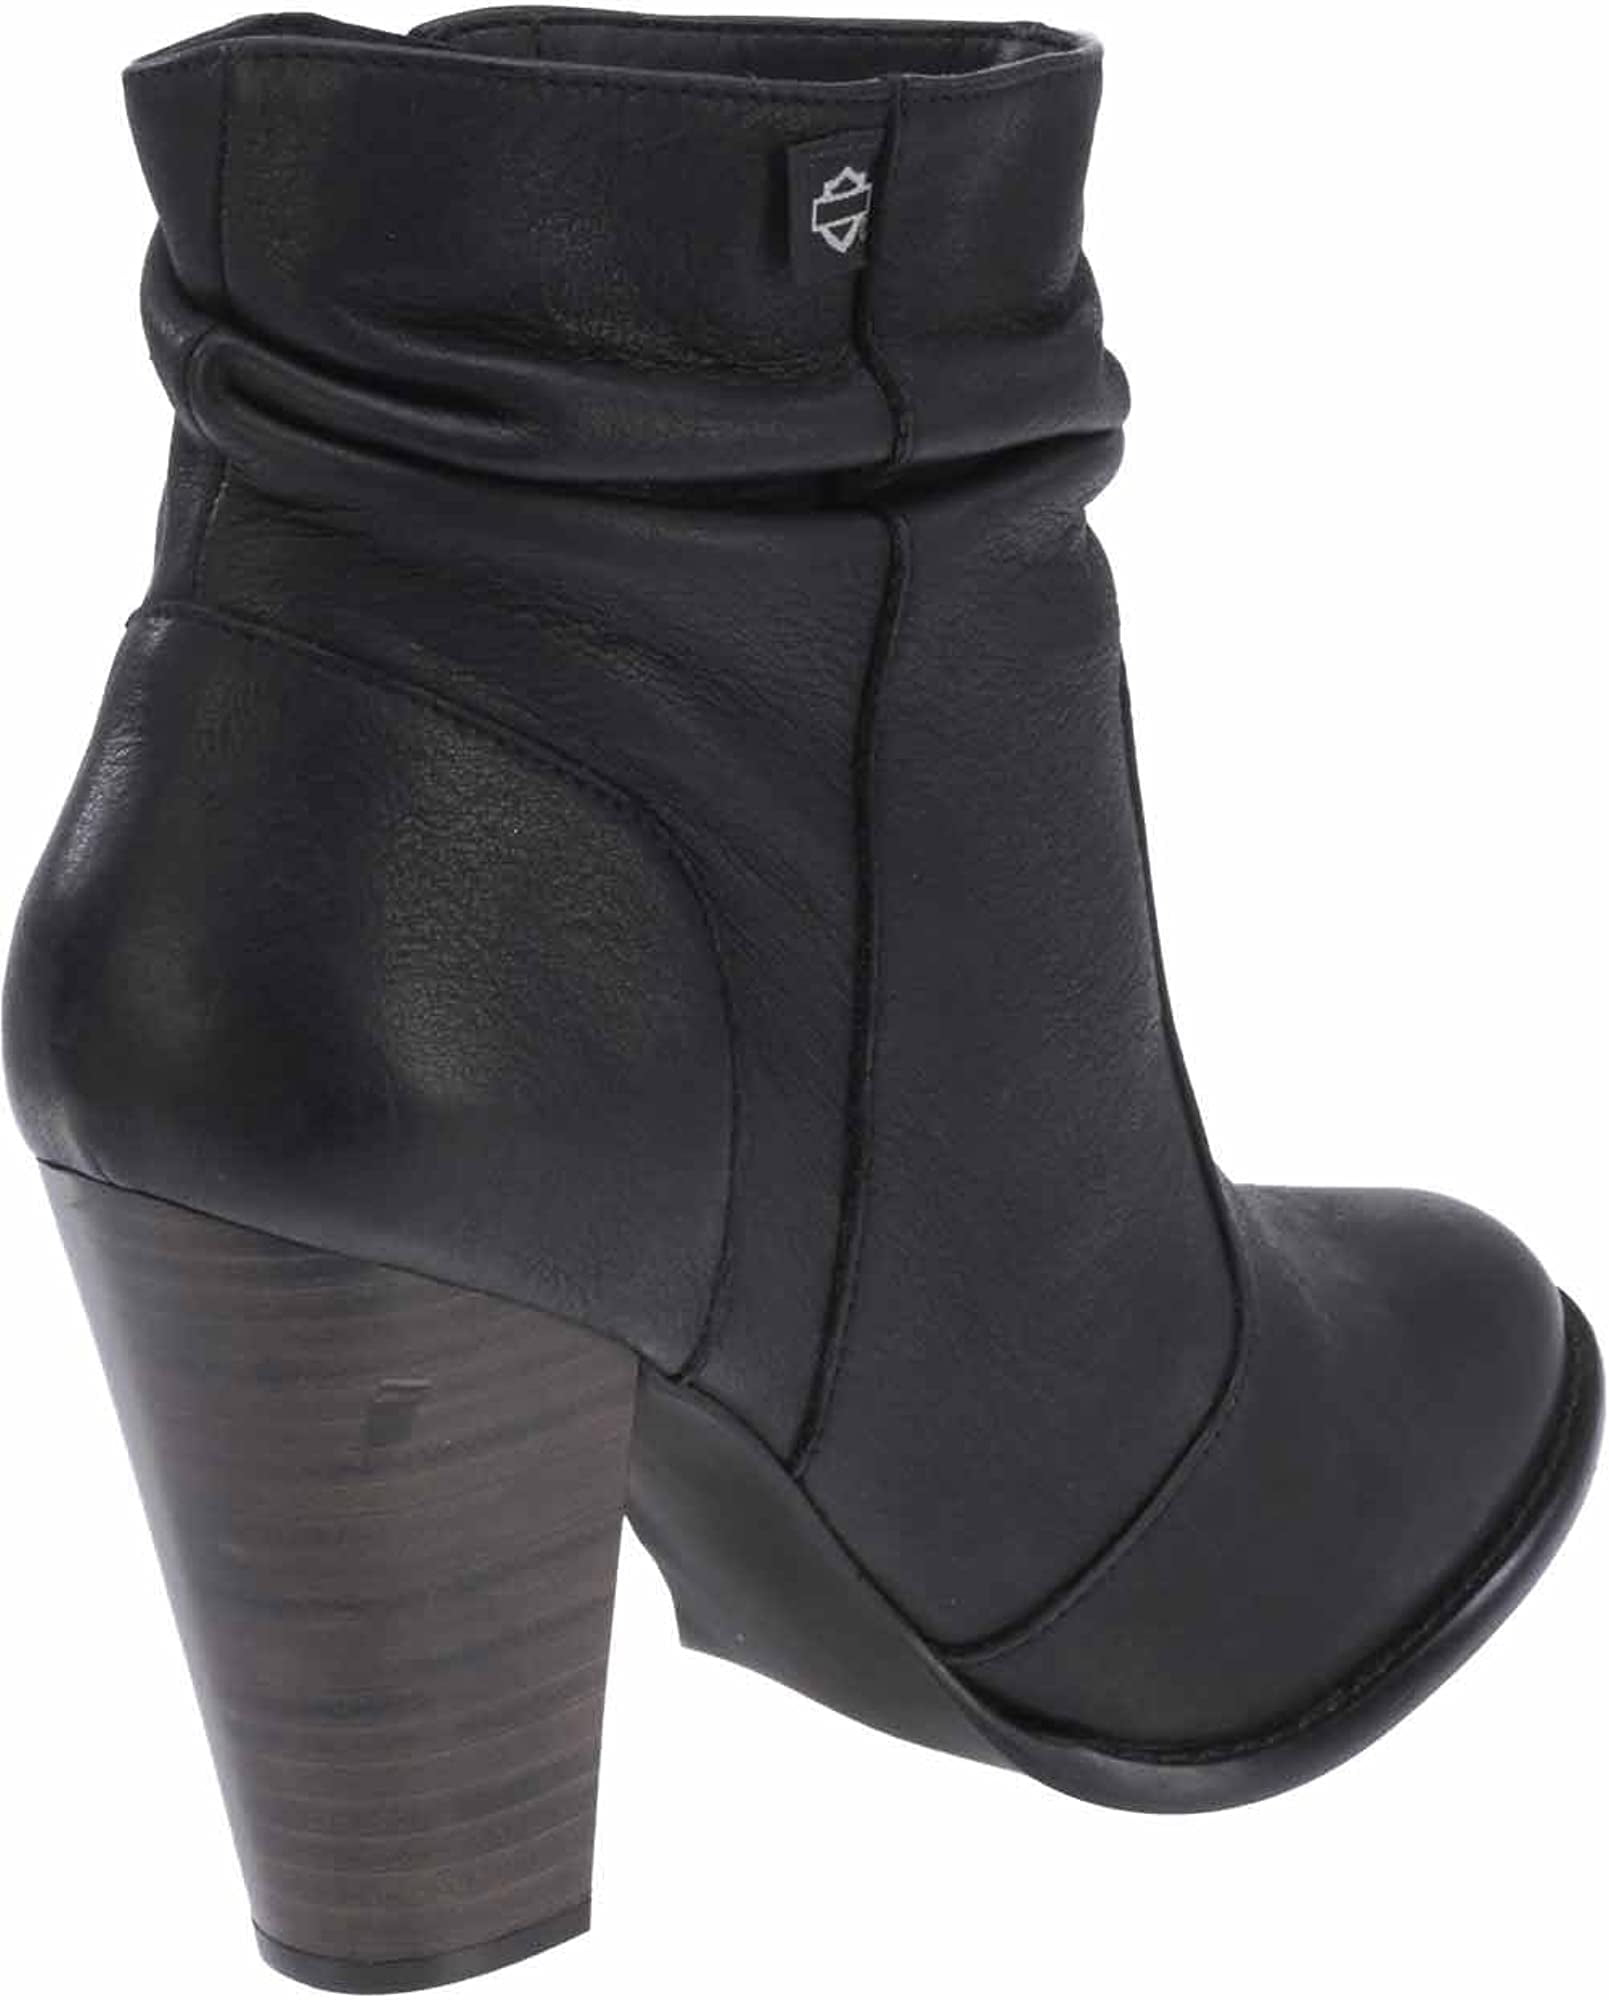 Ladies Harley Davidson Leather Ankle Boots Stonebrook 